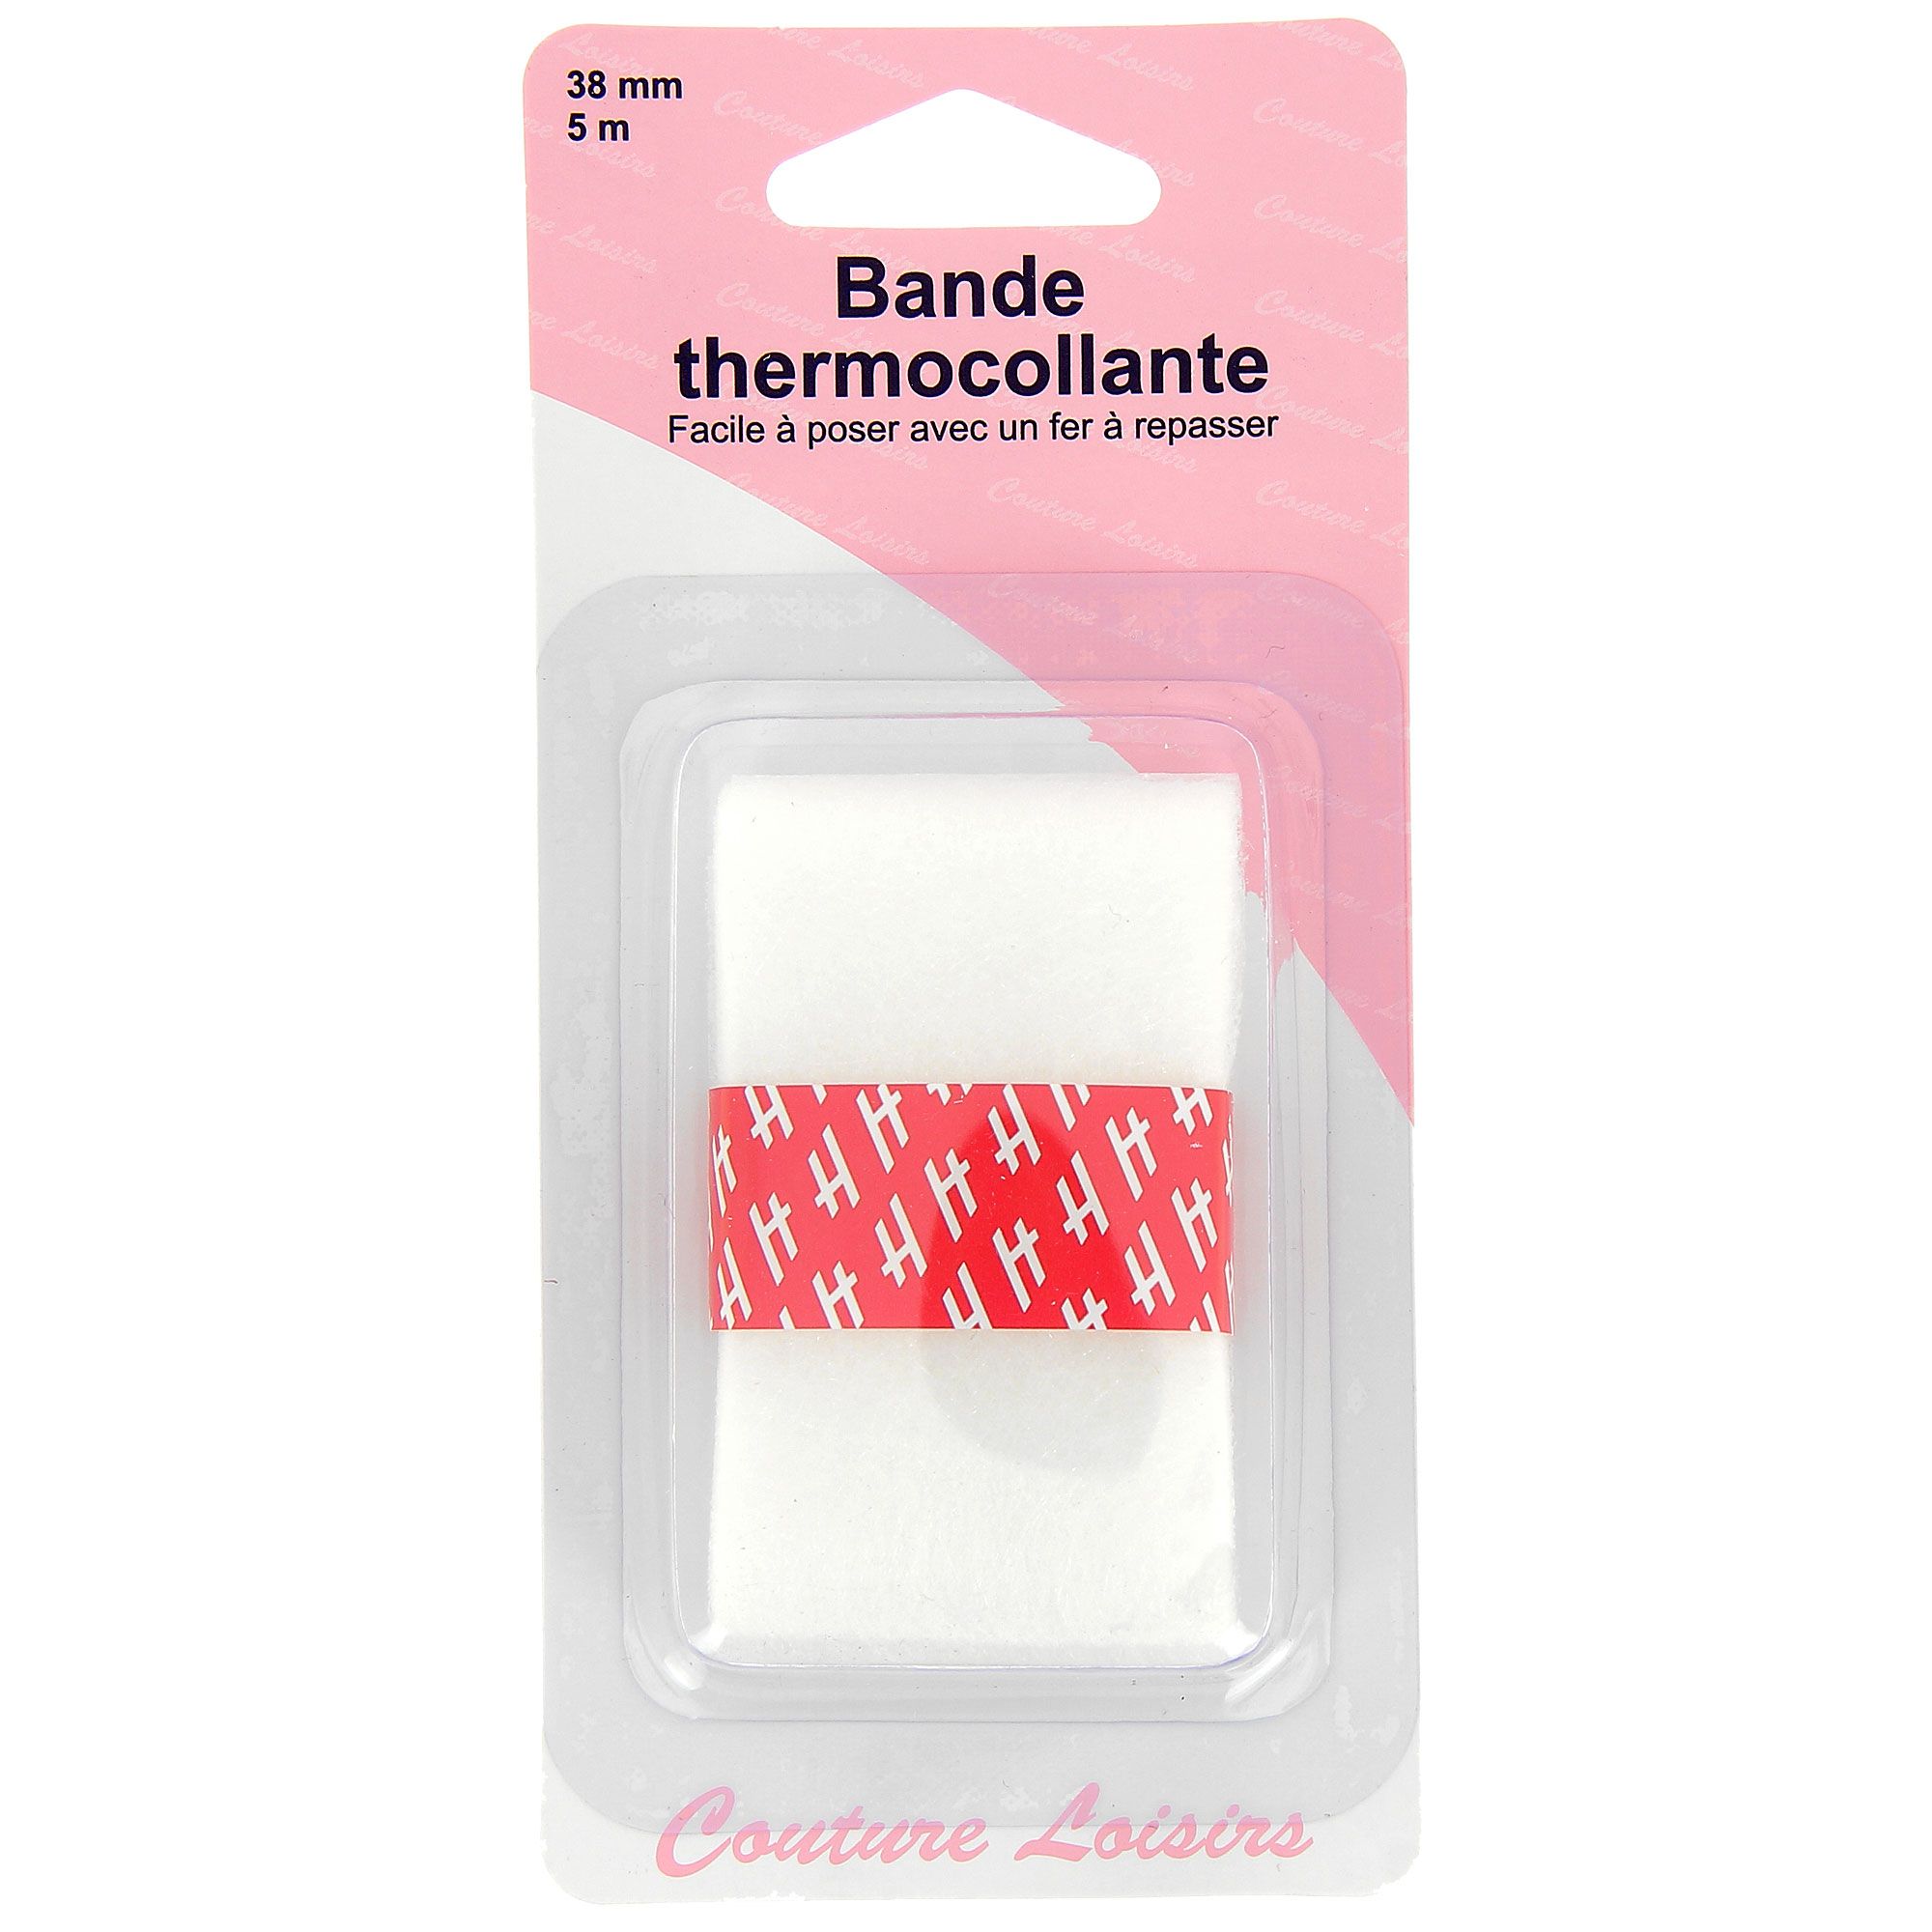 BANDE THERMOCOLLANTE 10M Thermocollant Couture Tissu Thermocollant Ourlet  Ther EUR 13,25 - PicClick FR